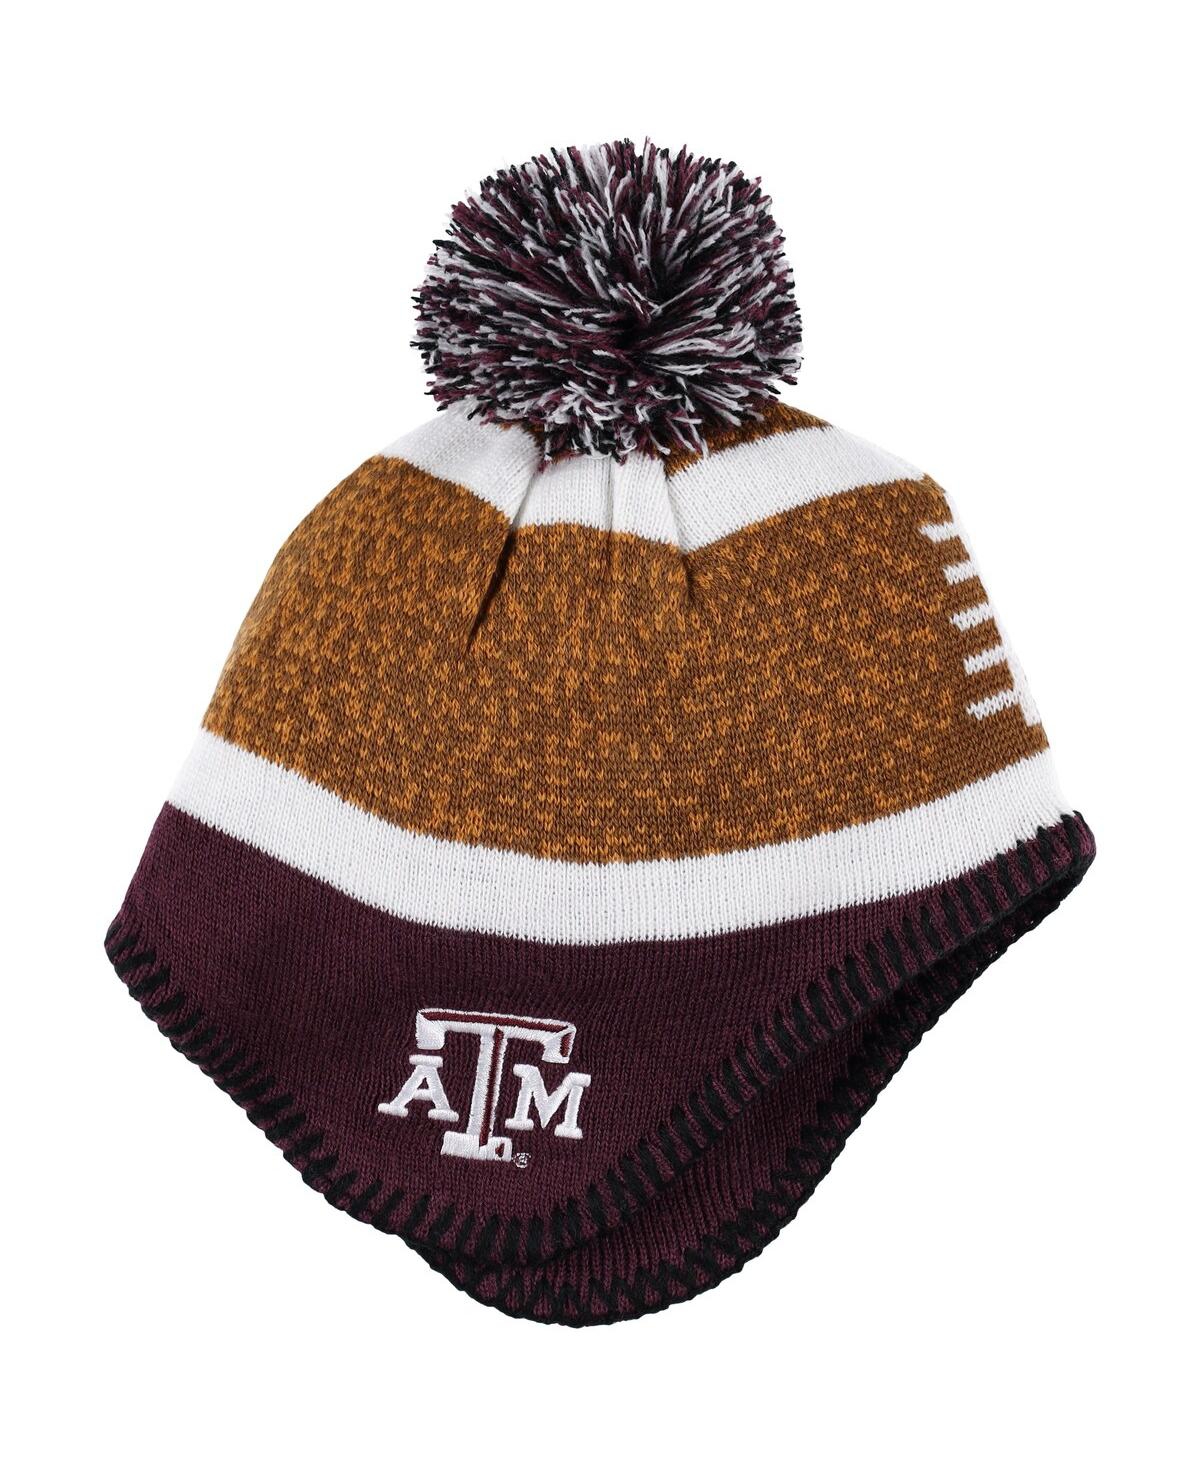 Outerstuff Babies' Little Boys And Girls Brown, Maroon Texas A&m Aggies Football Head Knit Hat With Pom In Brown,maroon